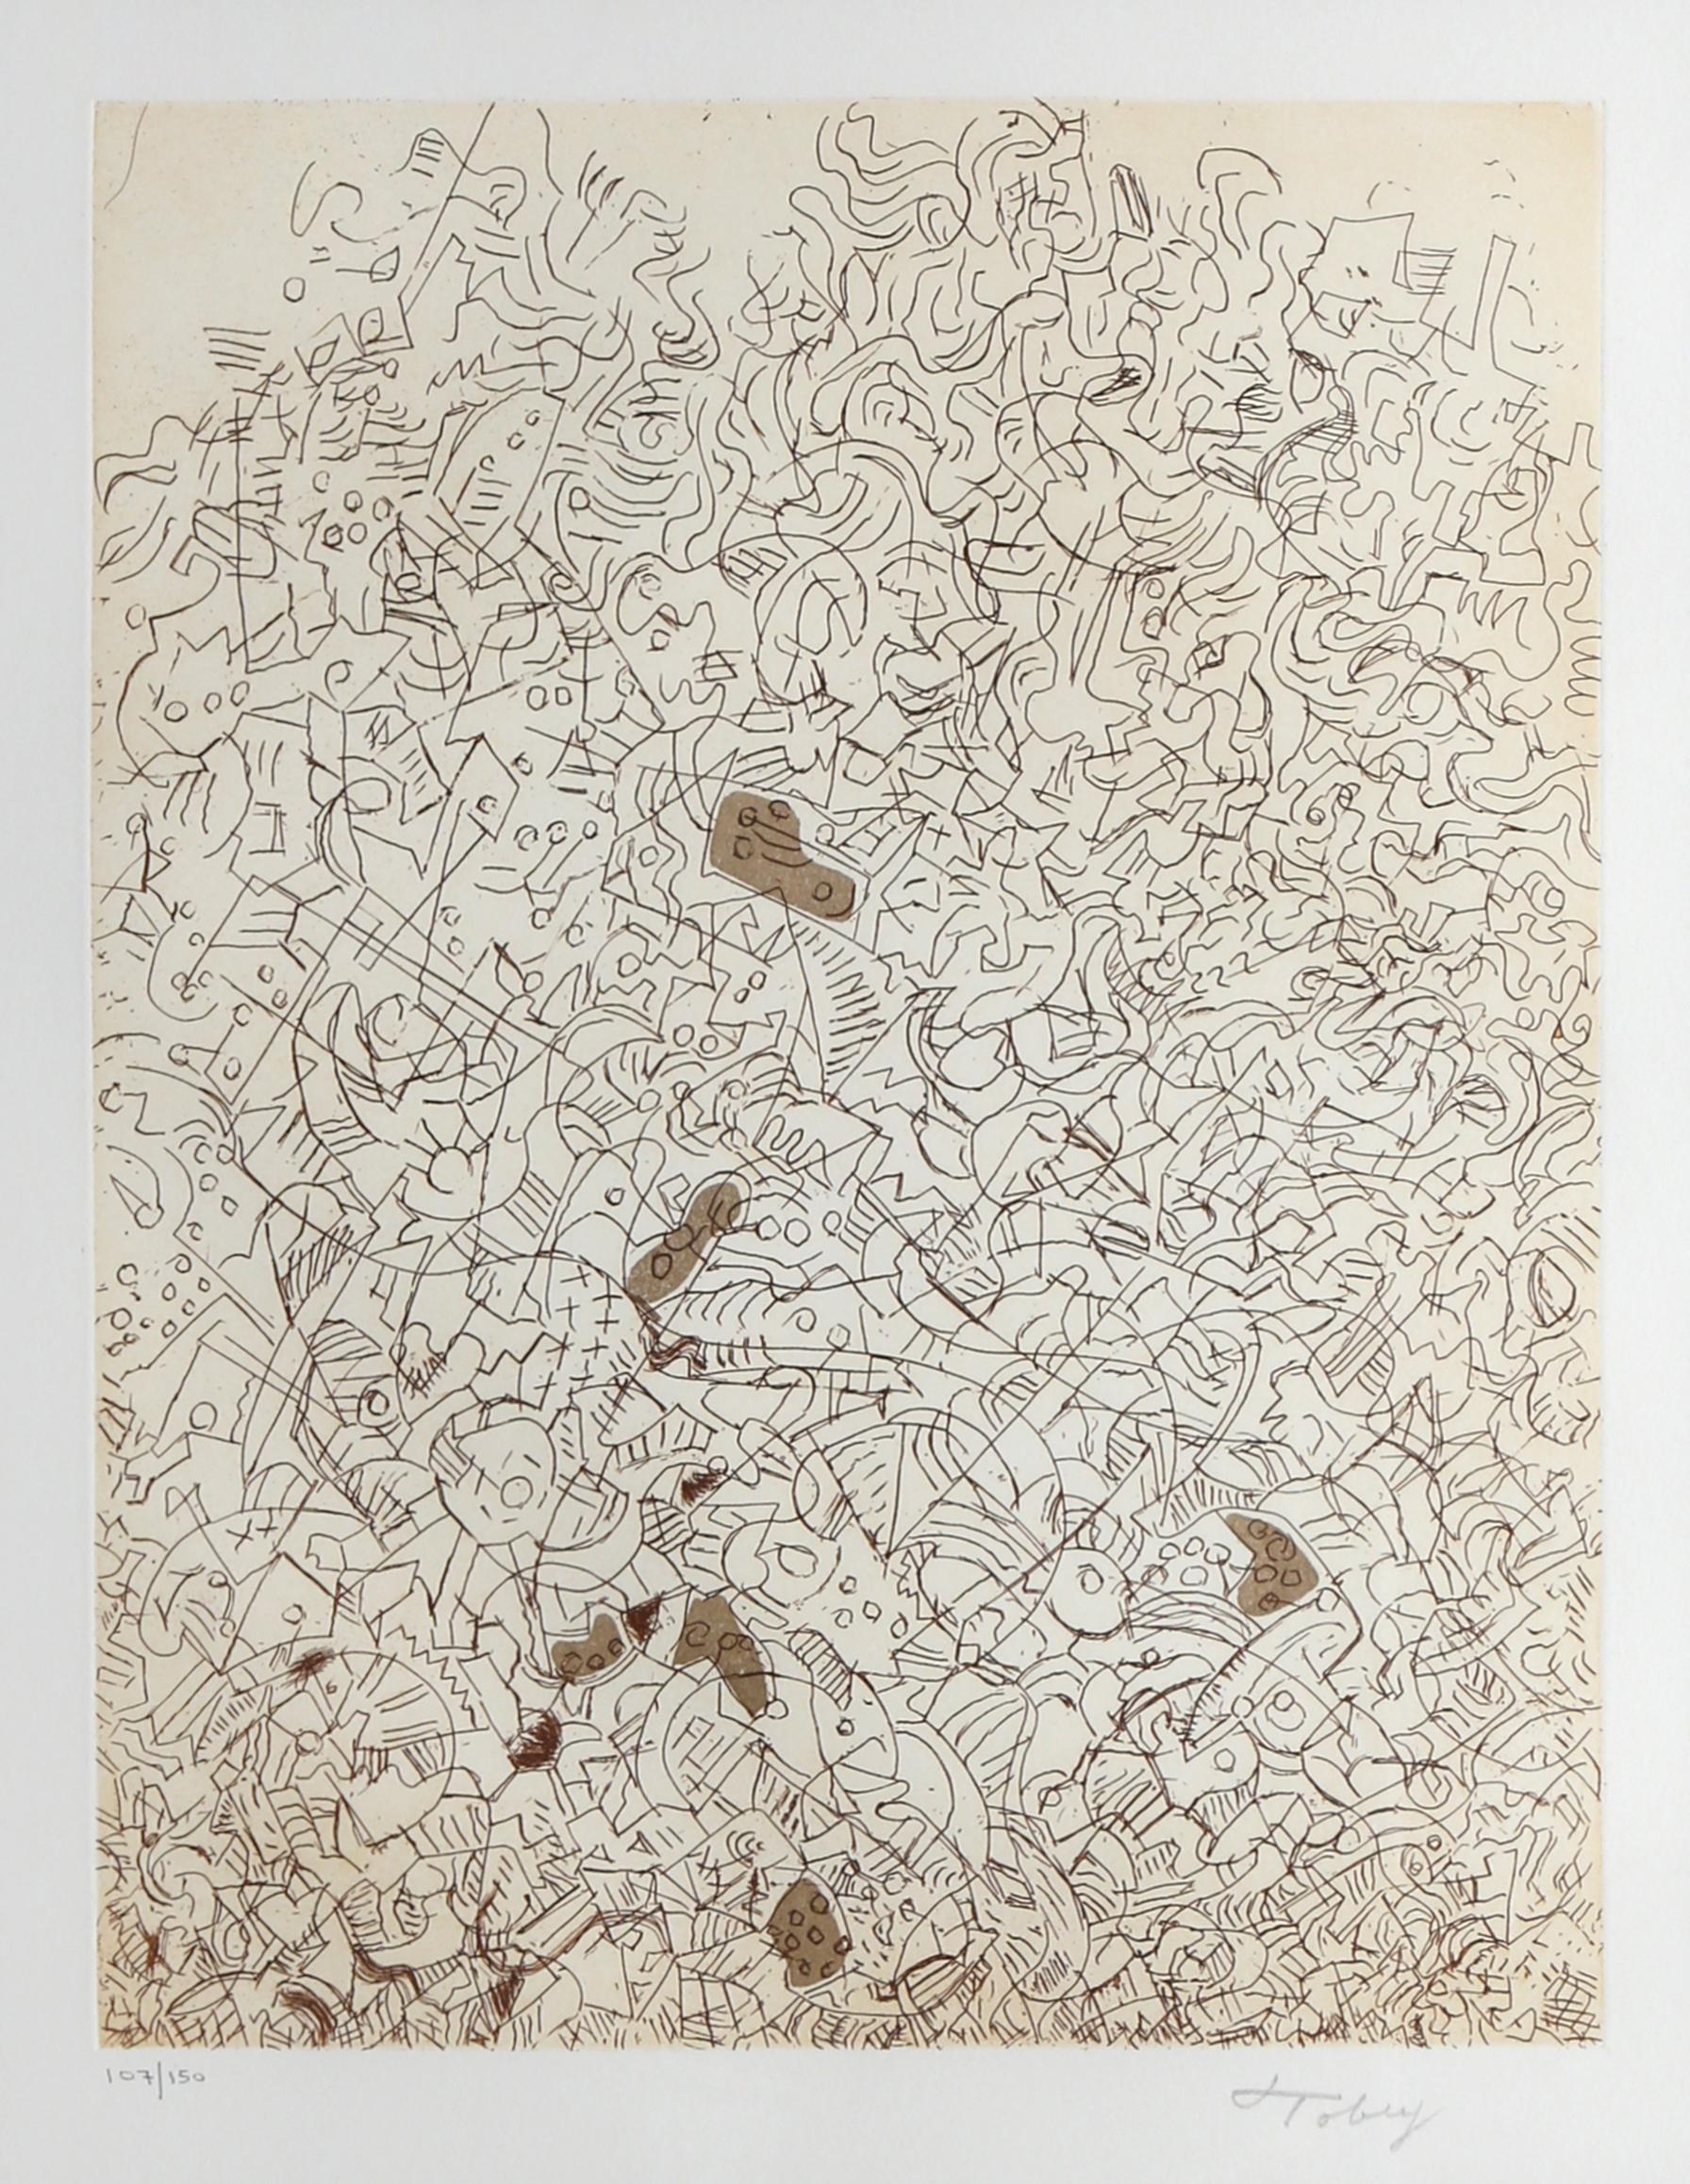 Psaltery, 2nd Form
Mark Tobey, American (1890–1976)
Date: 1974
Etching on Japon, signed and numbered in pencil
Edition of 107/150
Image Size: 14 x 11 inches
Size: 26.5 in. x 20 in. (67.31 cm x 50.8 cm)
Frame Size: 28.5 x 23 inches